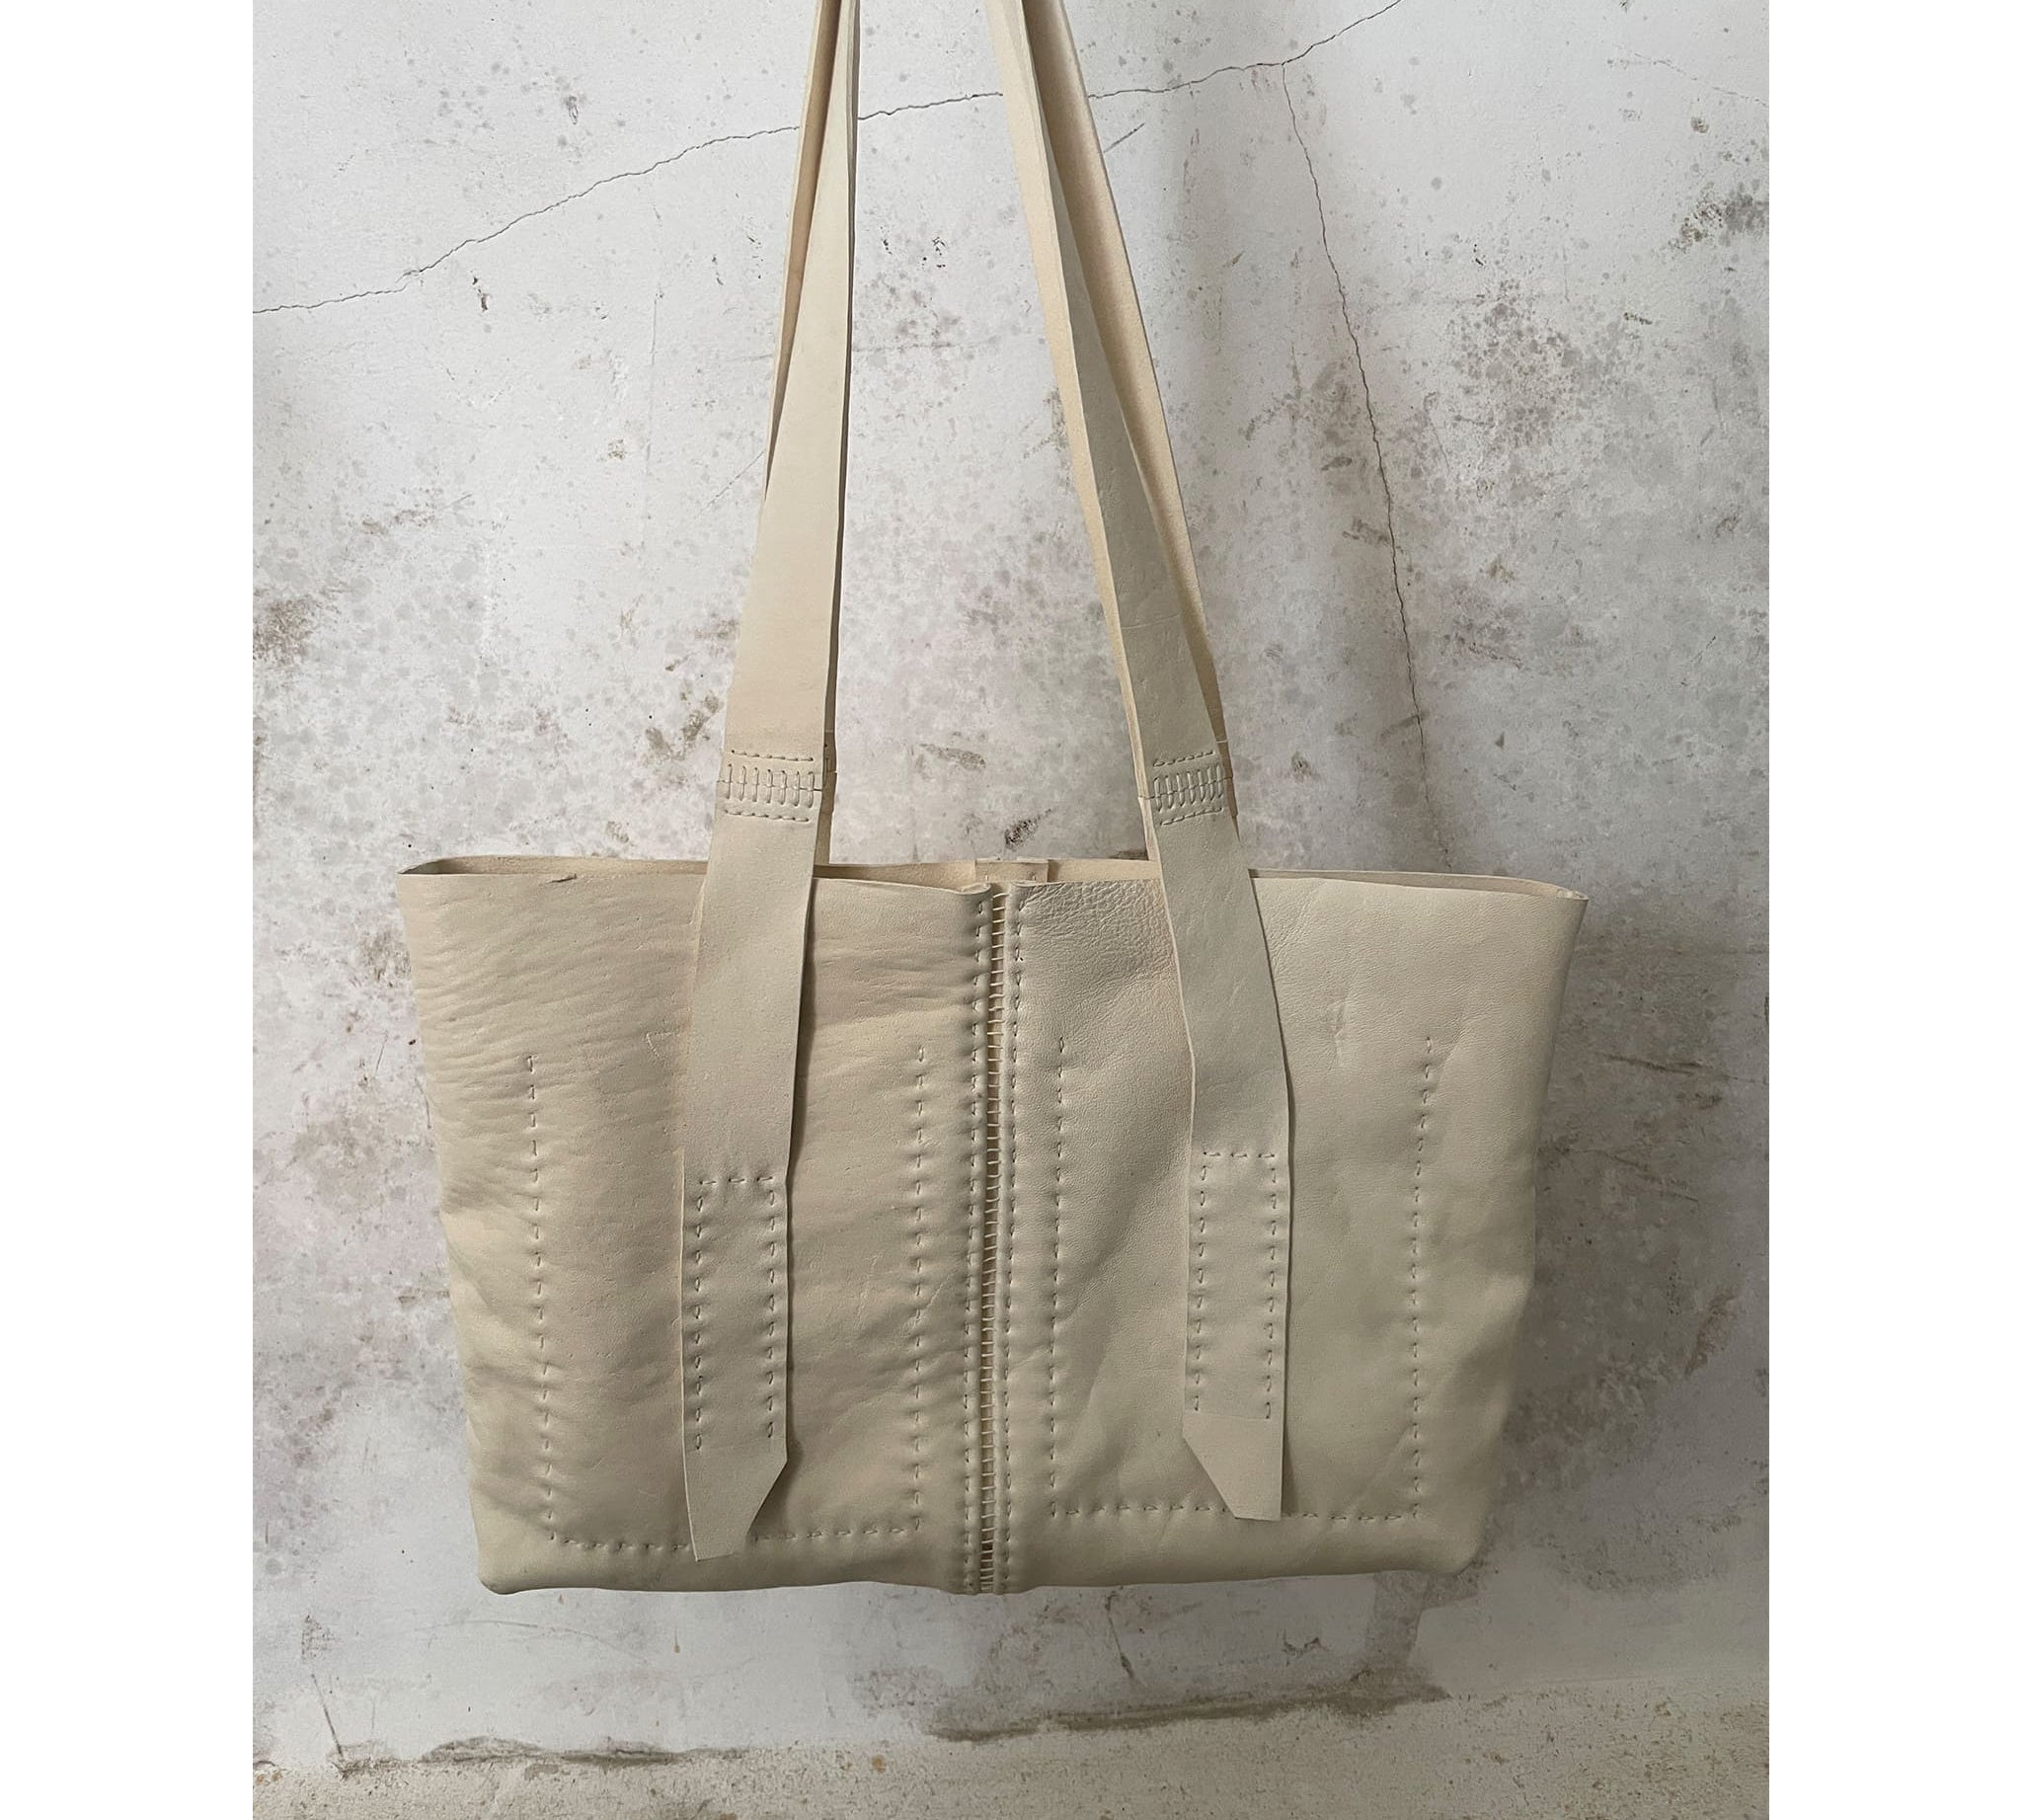 white horse culatta leather city shopper bag entirely hand stitched with an open seam construction and multiple interior pockets from uk based leather studio atelier skn.